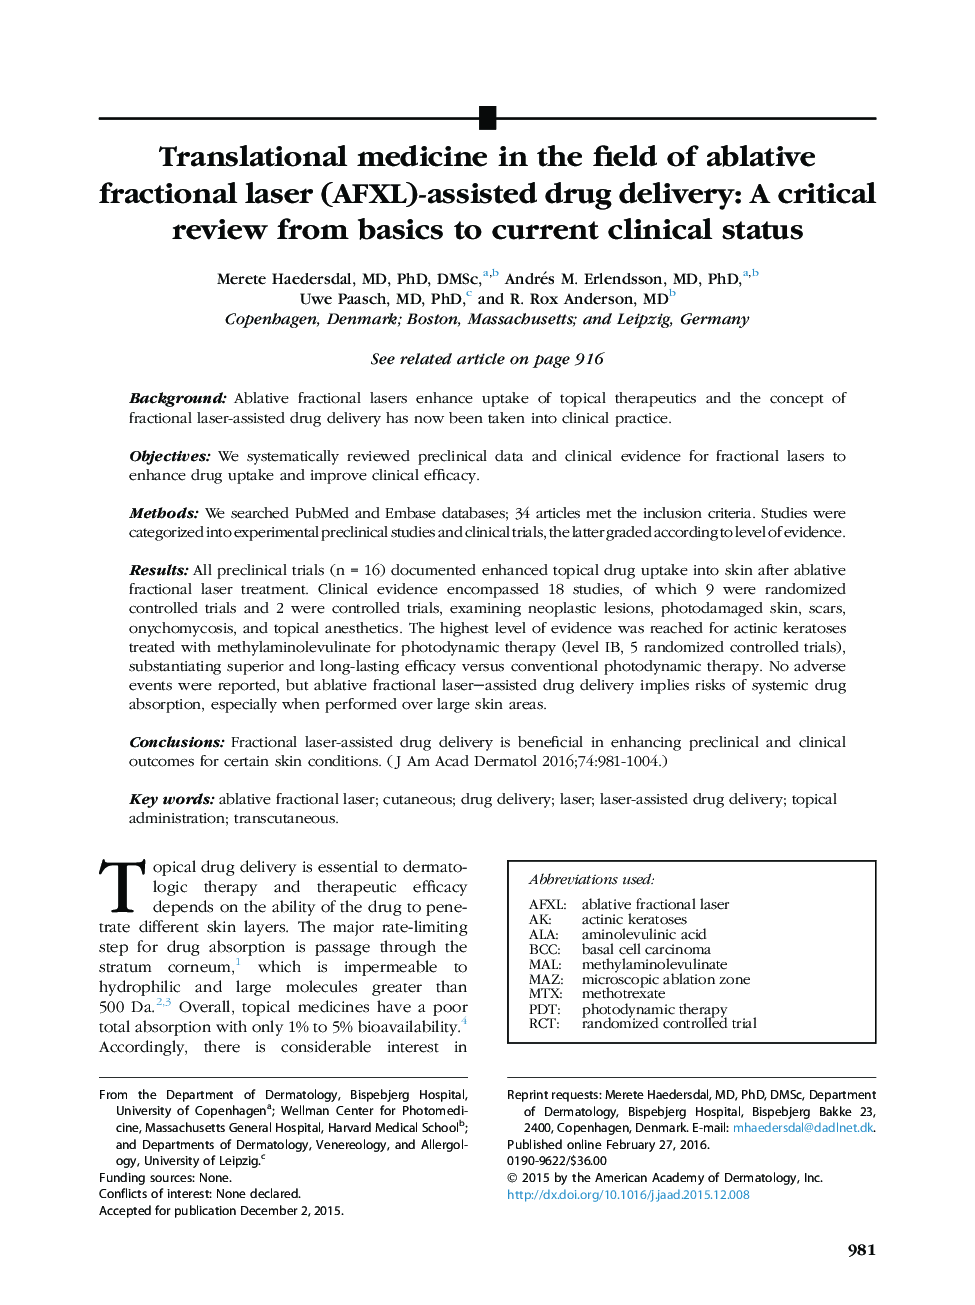 ReviewTranslational medicine in the field of ablative fractional laser (AFXL)-assisted drug delivery: A critical review from basics to current clinical status